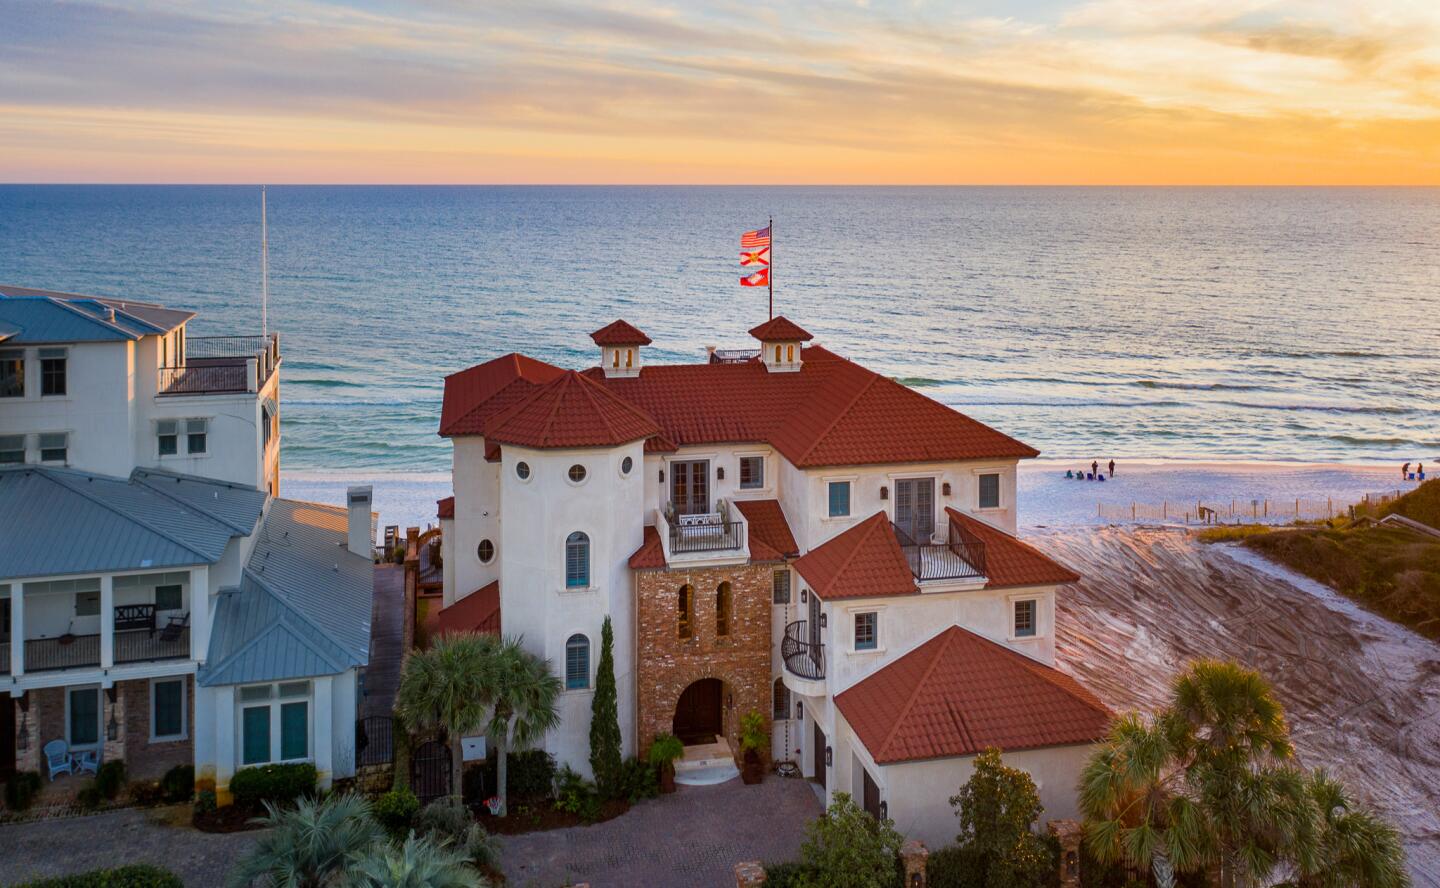 The three-story home includes six bedrooms, nine bathrooms, five balconies and a rooftop deck overlooking the beach.